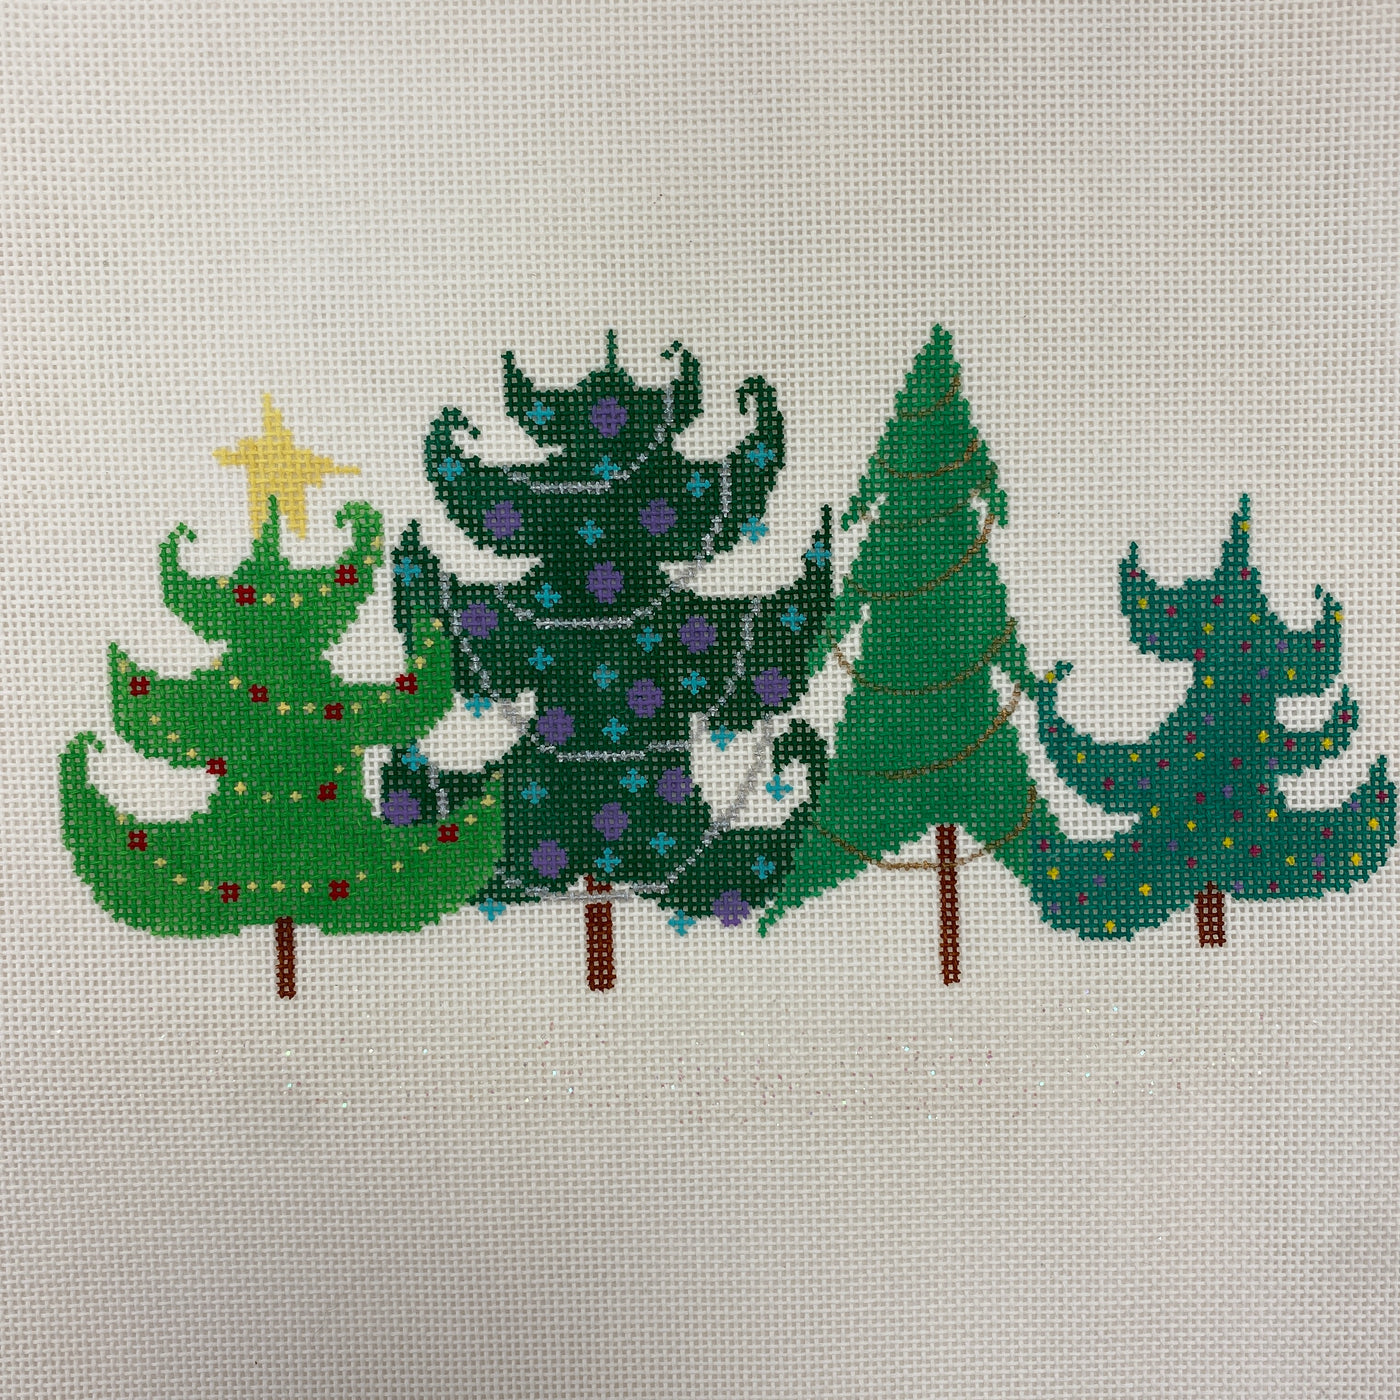 Hopeful Trees - Vintage, with Stitch Guide